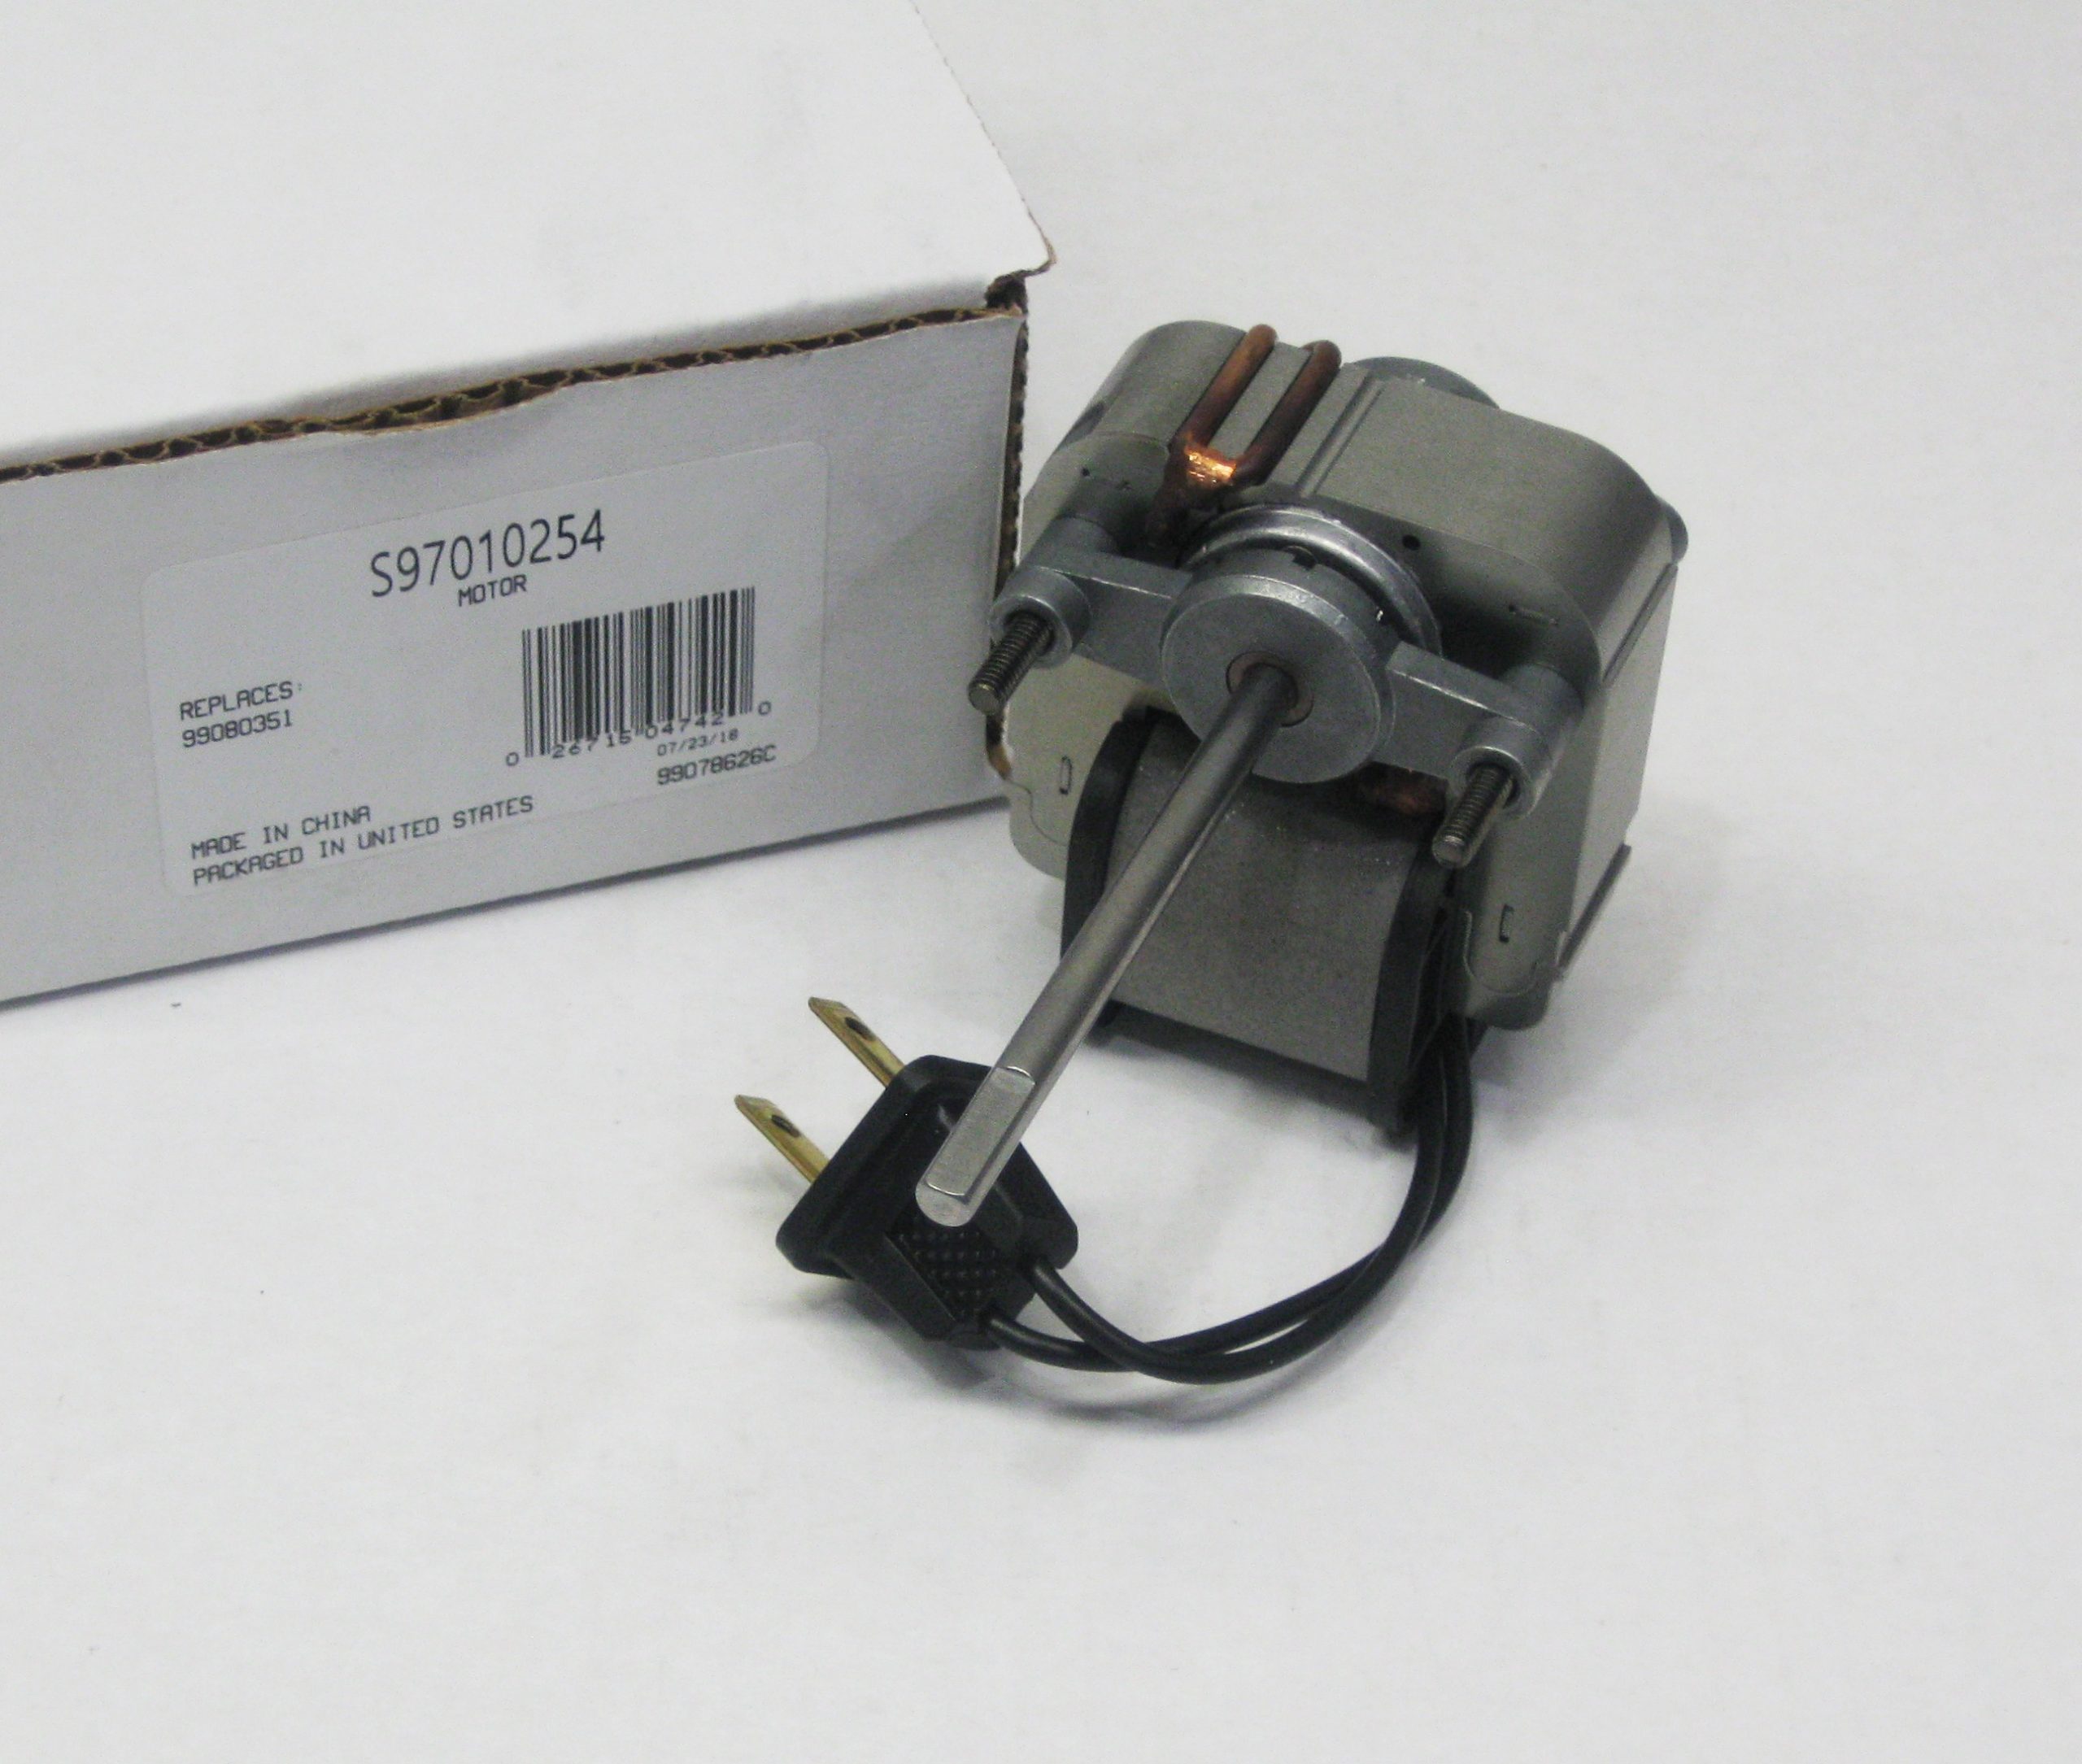 Details About 97010254 Broan Nutone Vent Bath Fan Motor For Models 99080351 162 164 pertaining to measurements 2583 X 2188